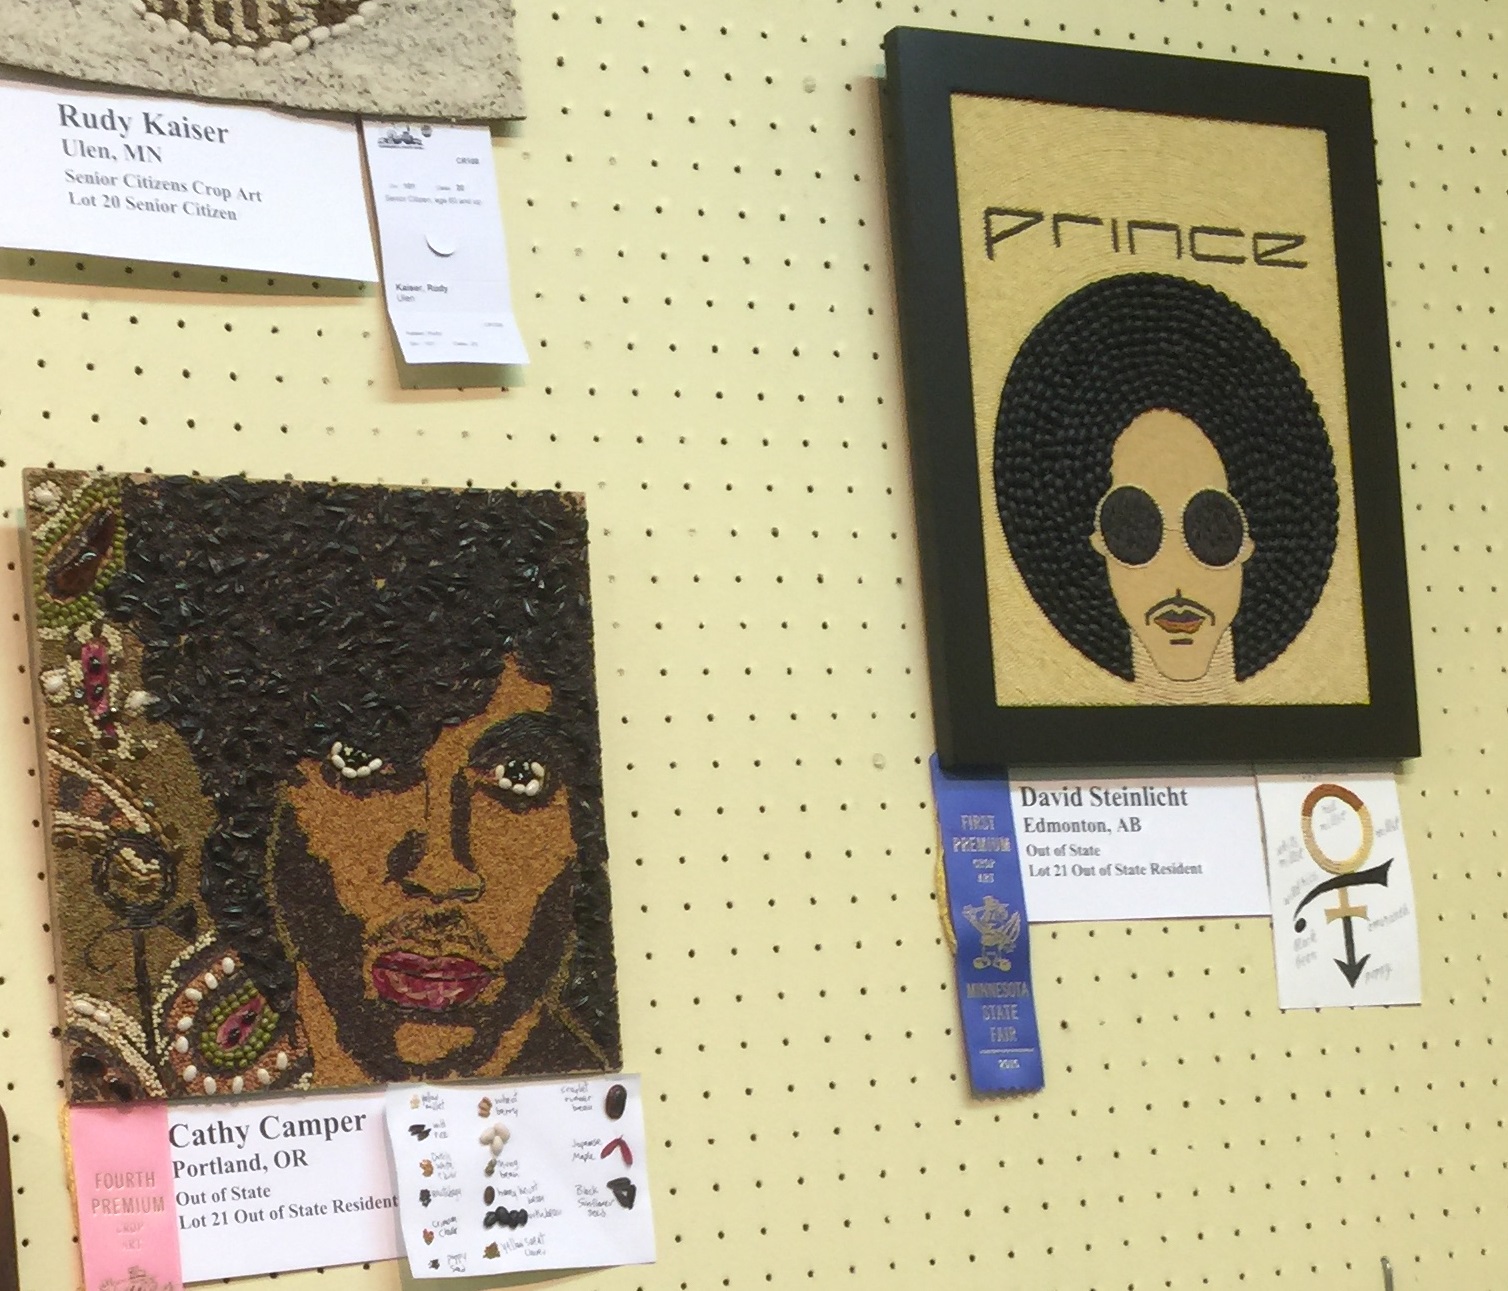 Two of several tributes to Prince.